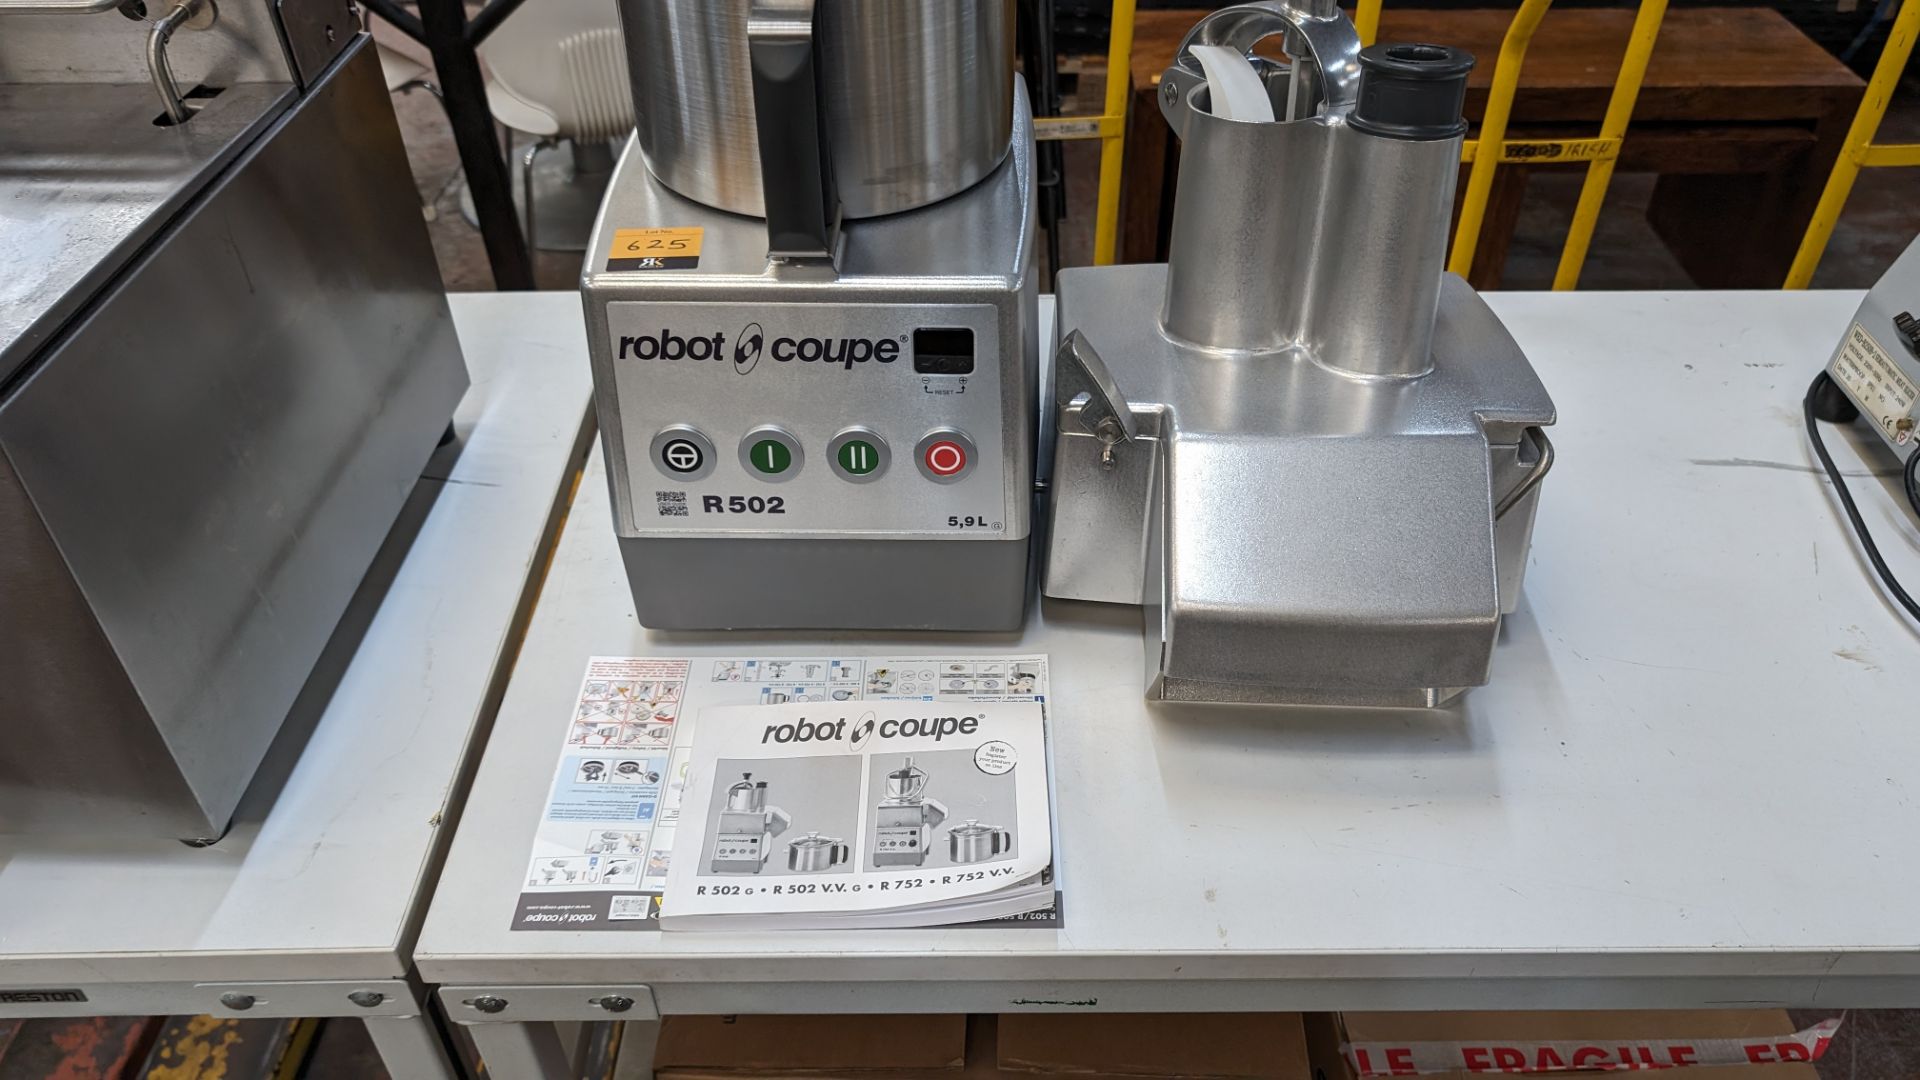 Robot Coupe model R502 5.9L commercial food processor plus vegetable processor attachment. Both the - Image 3 of 10